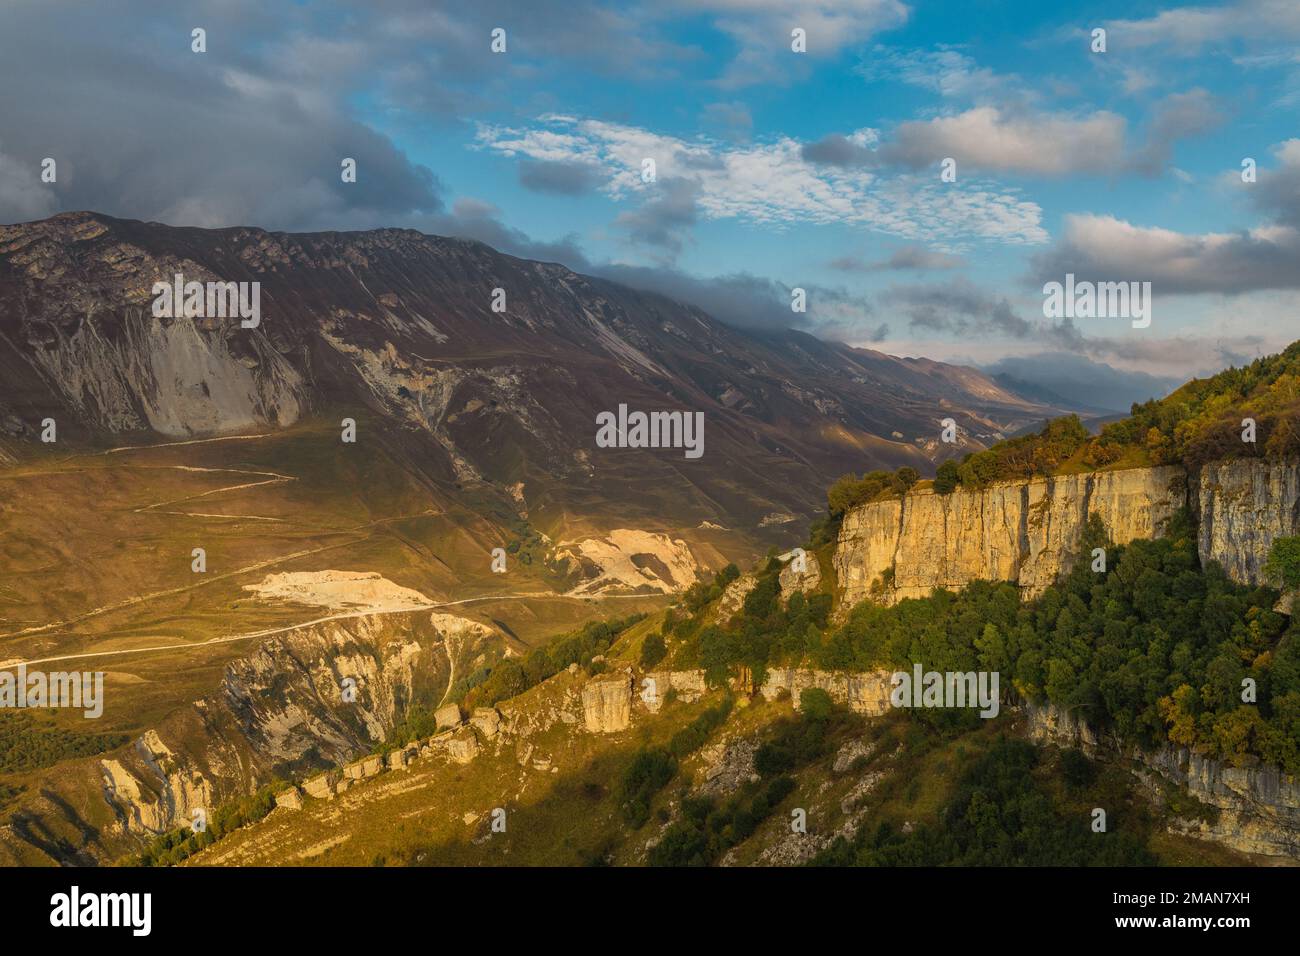 Stunning landscape with Khunzakh Canyon in the Republic of Dagestan, Russia Stock Photo